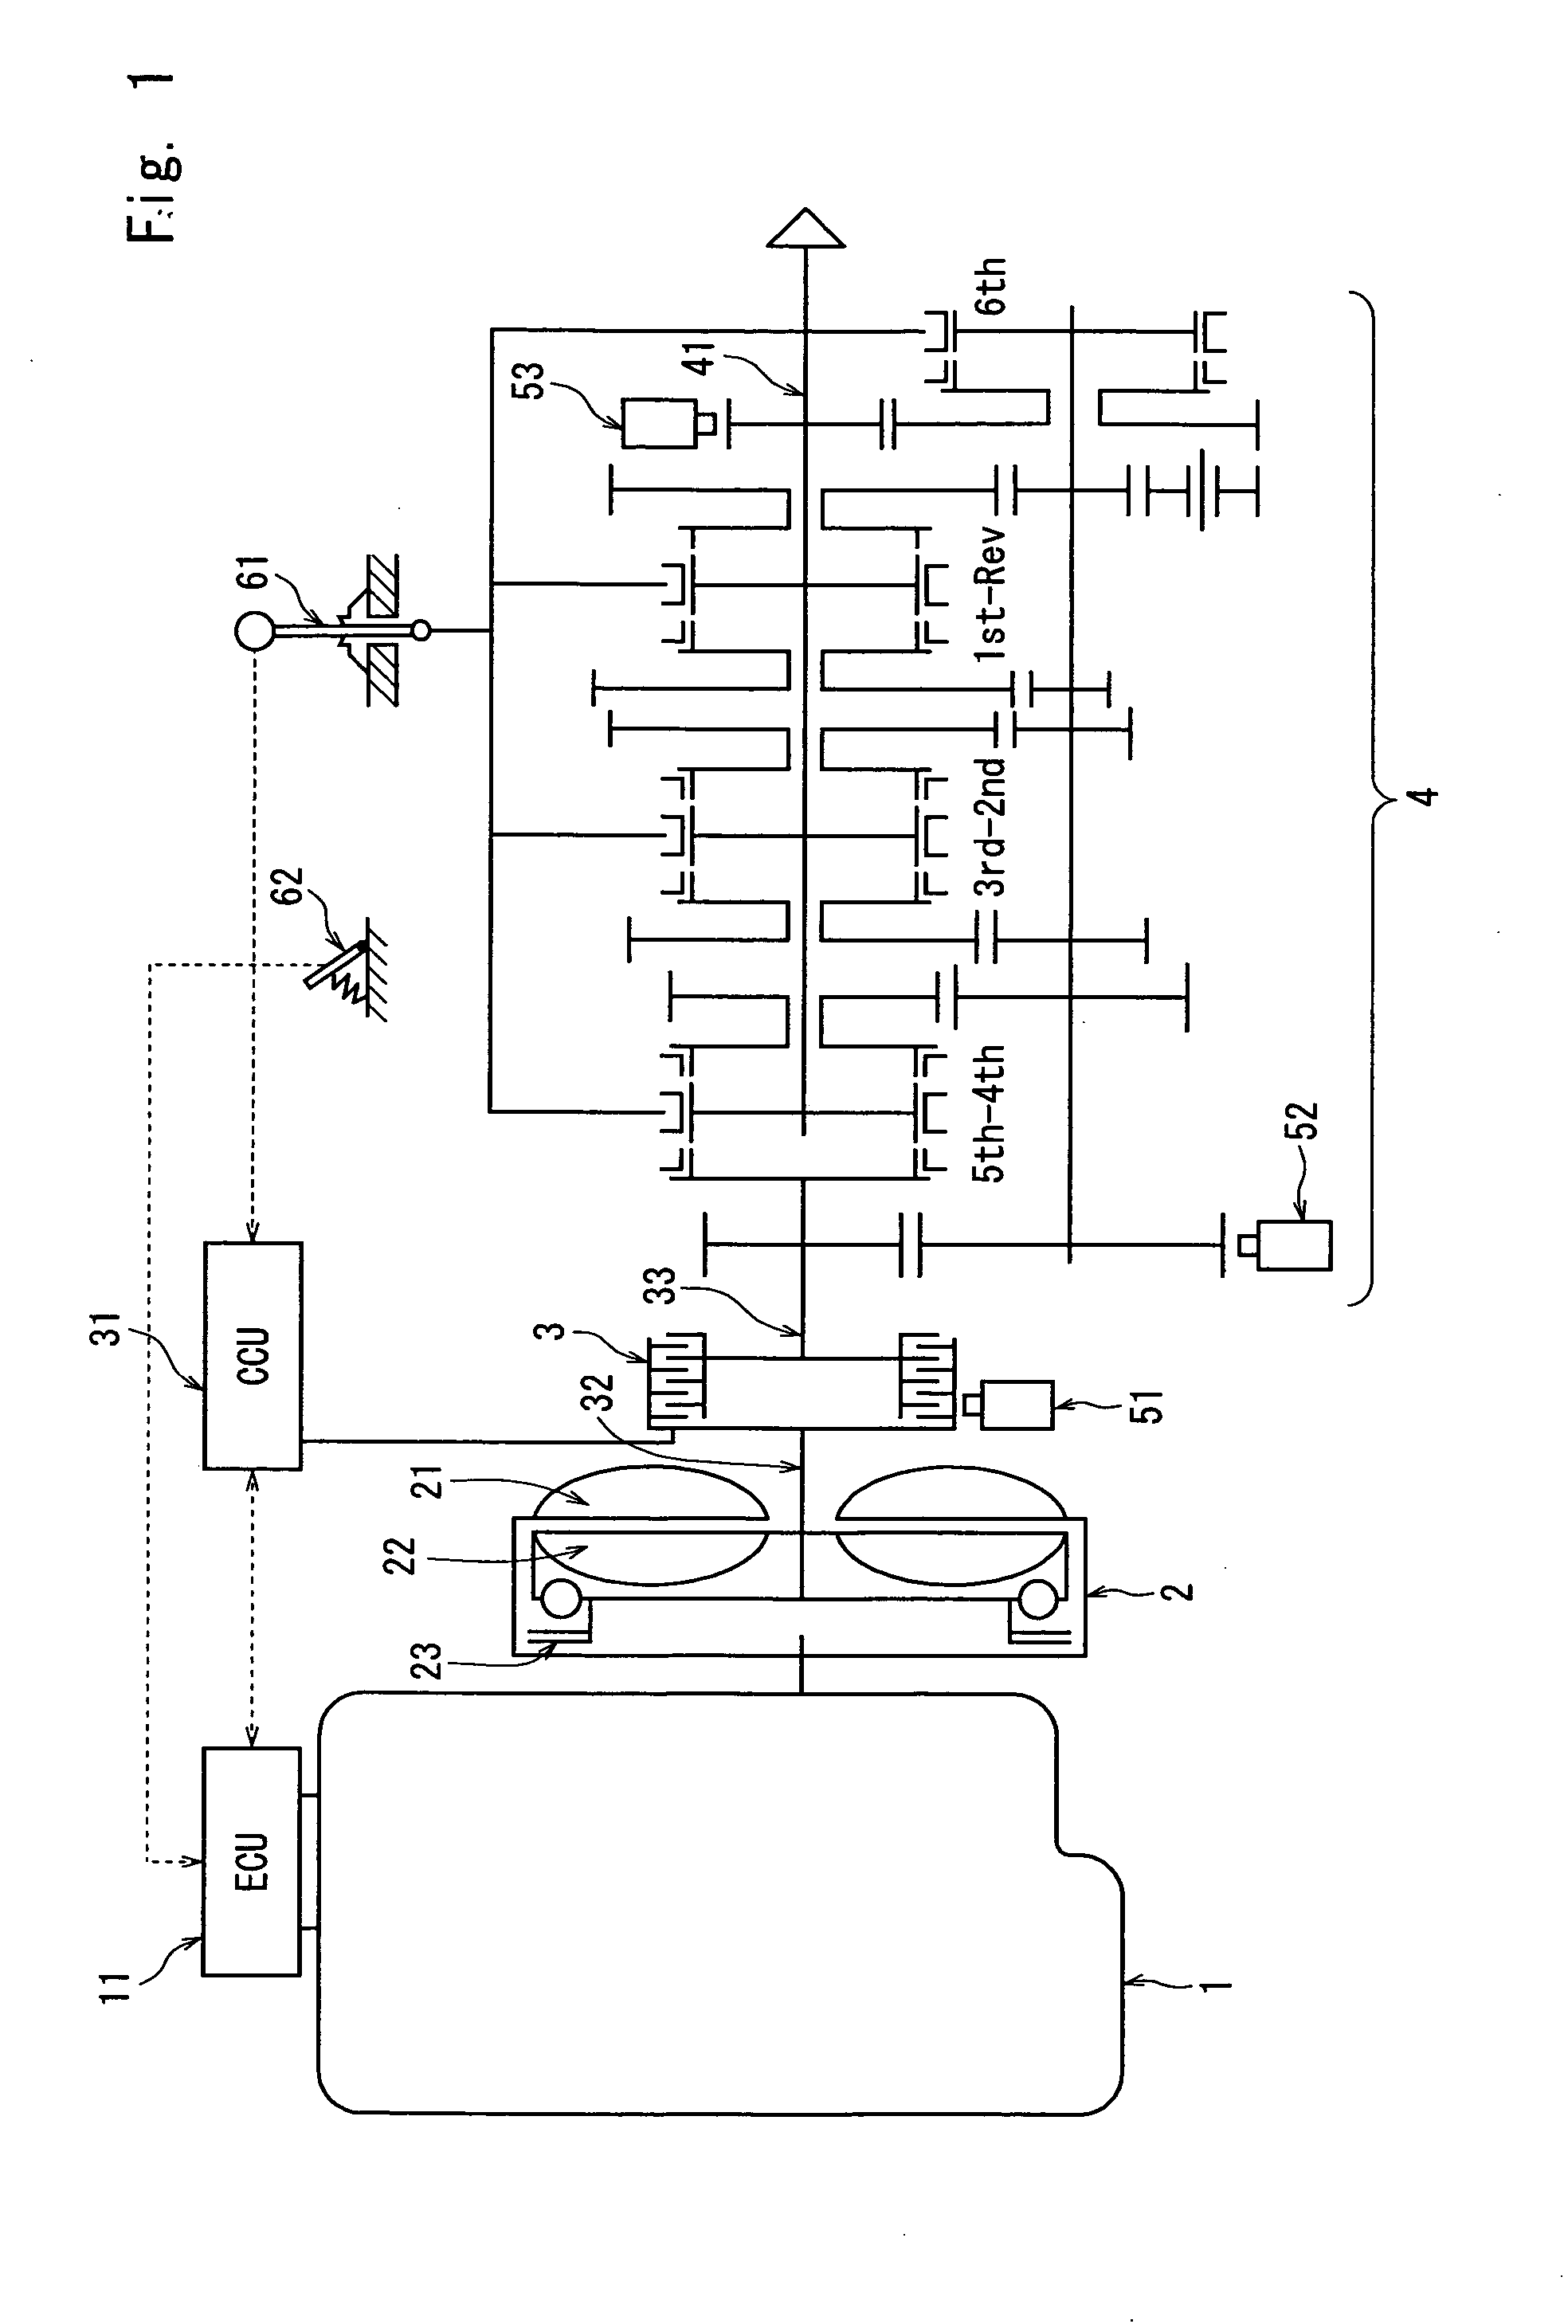 Vehicle controller of a vehicle power transmission device